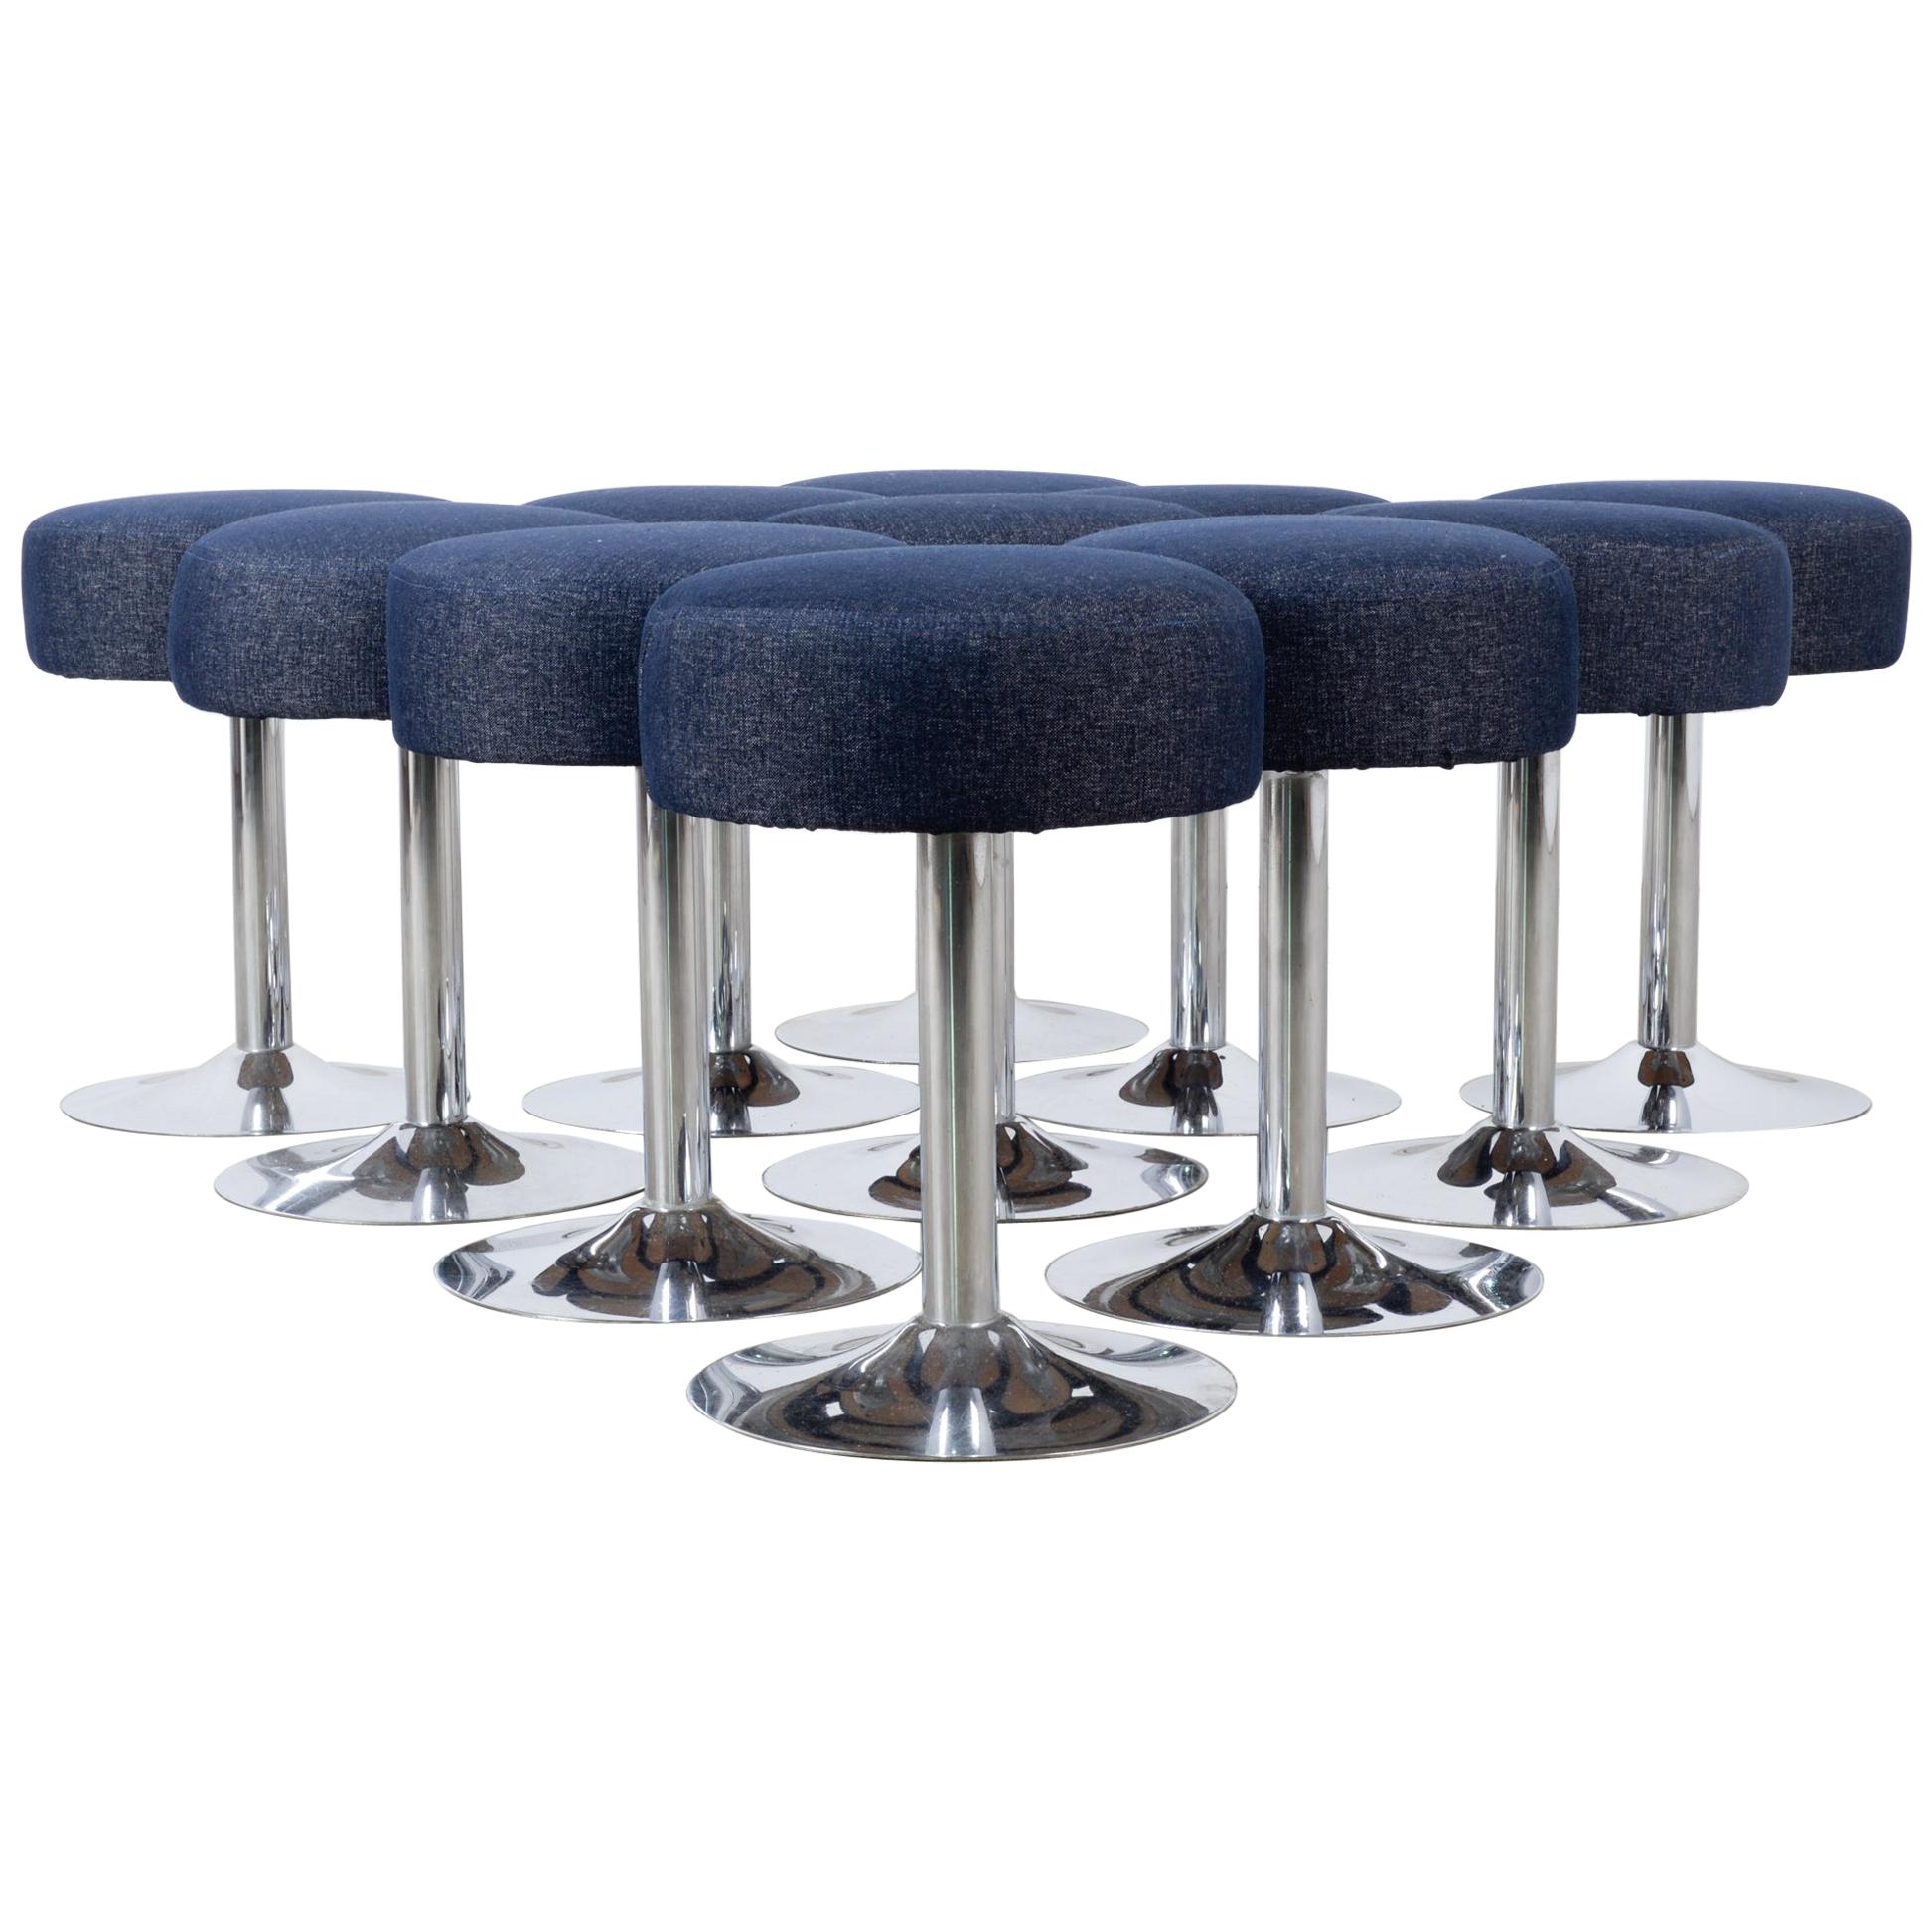 1960s French Metal Stools with Upholstered Seats, Set of Eleven